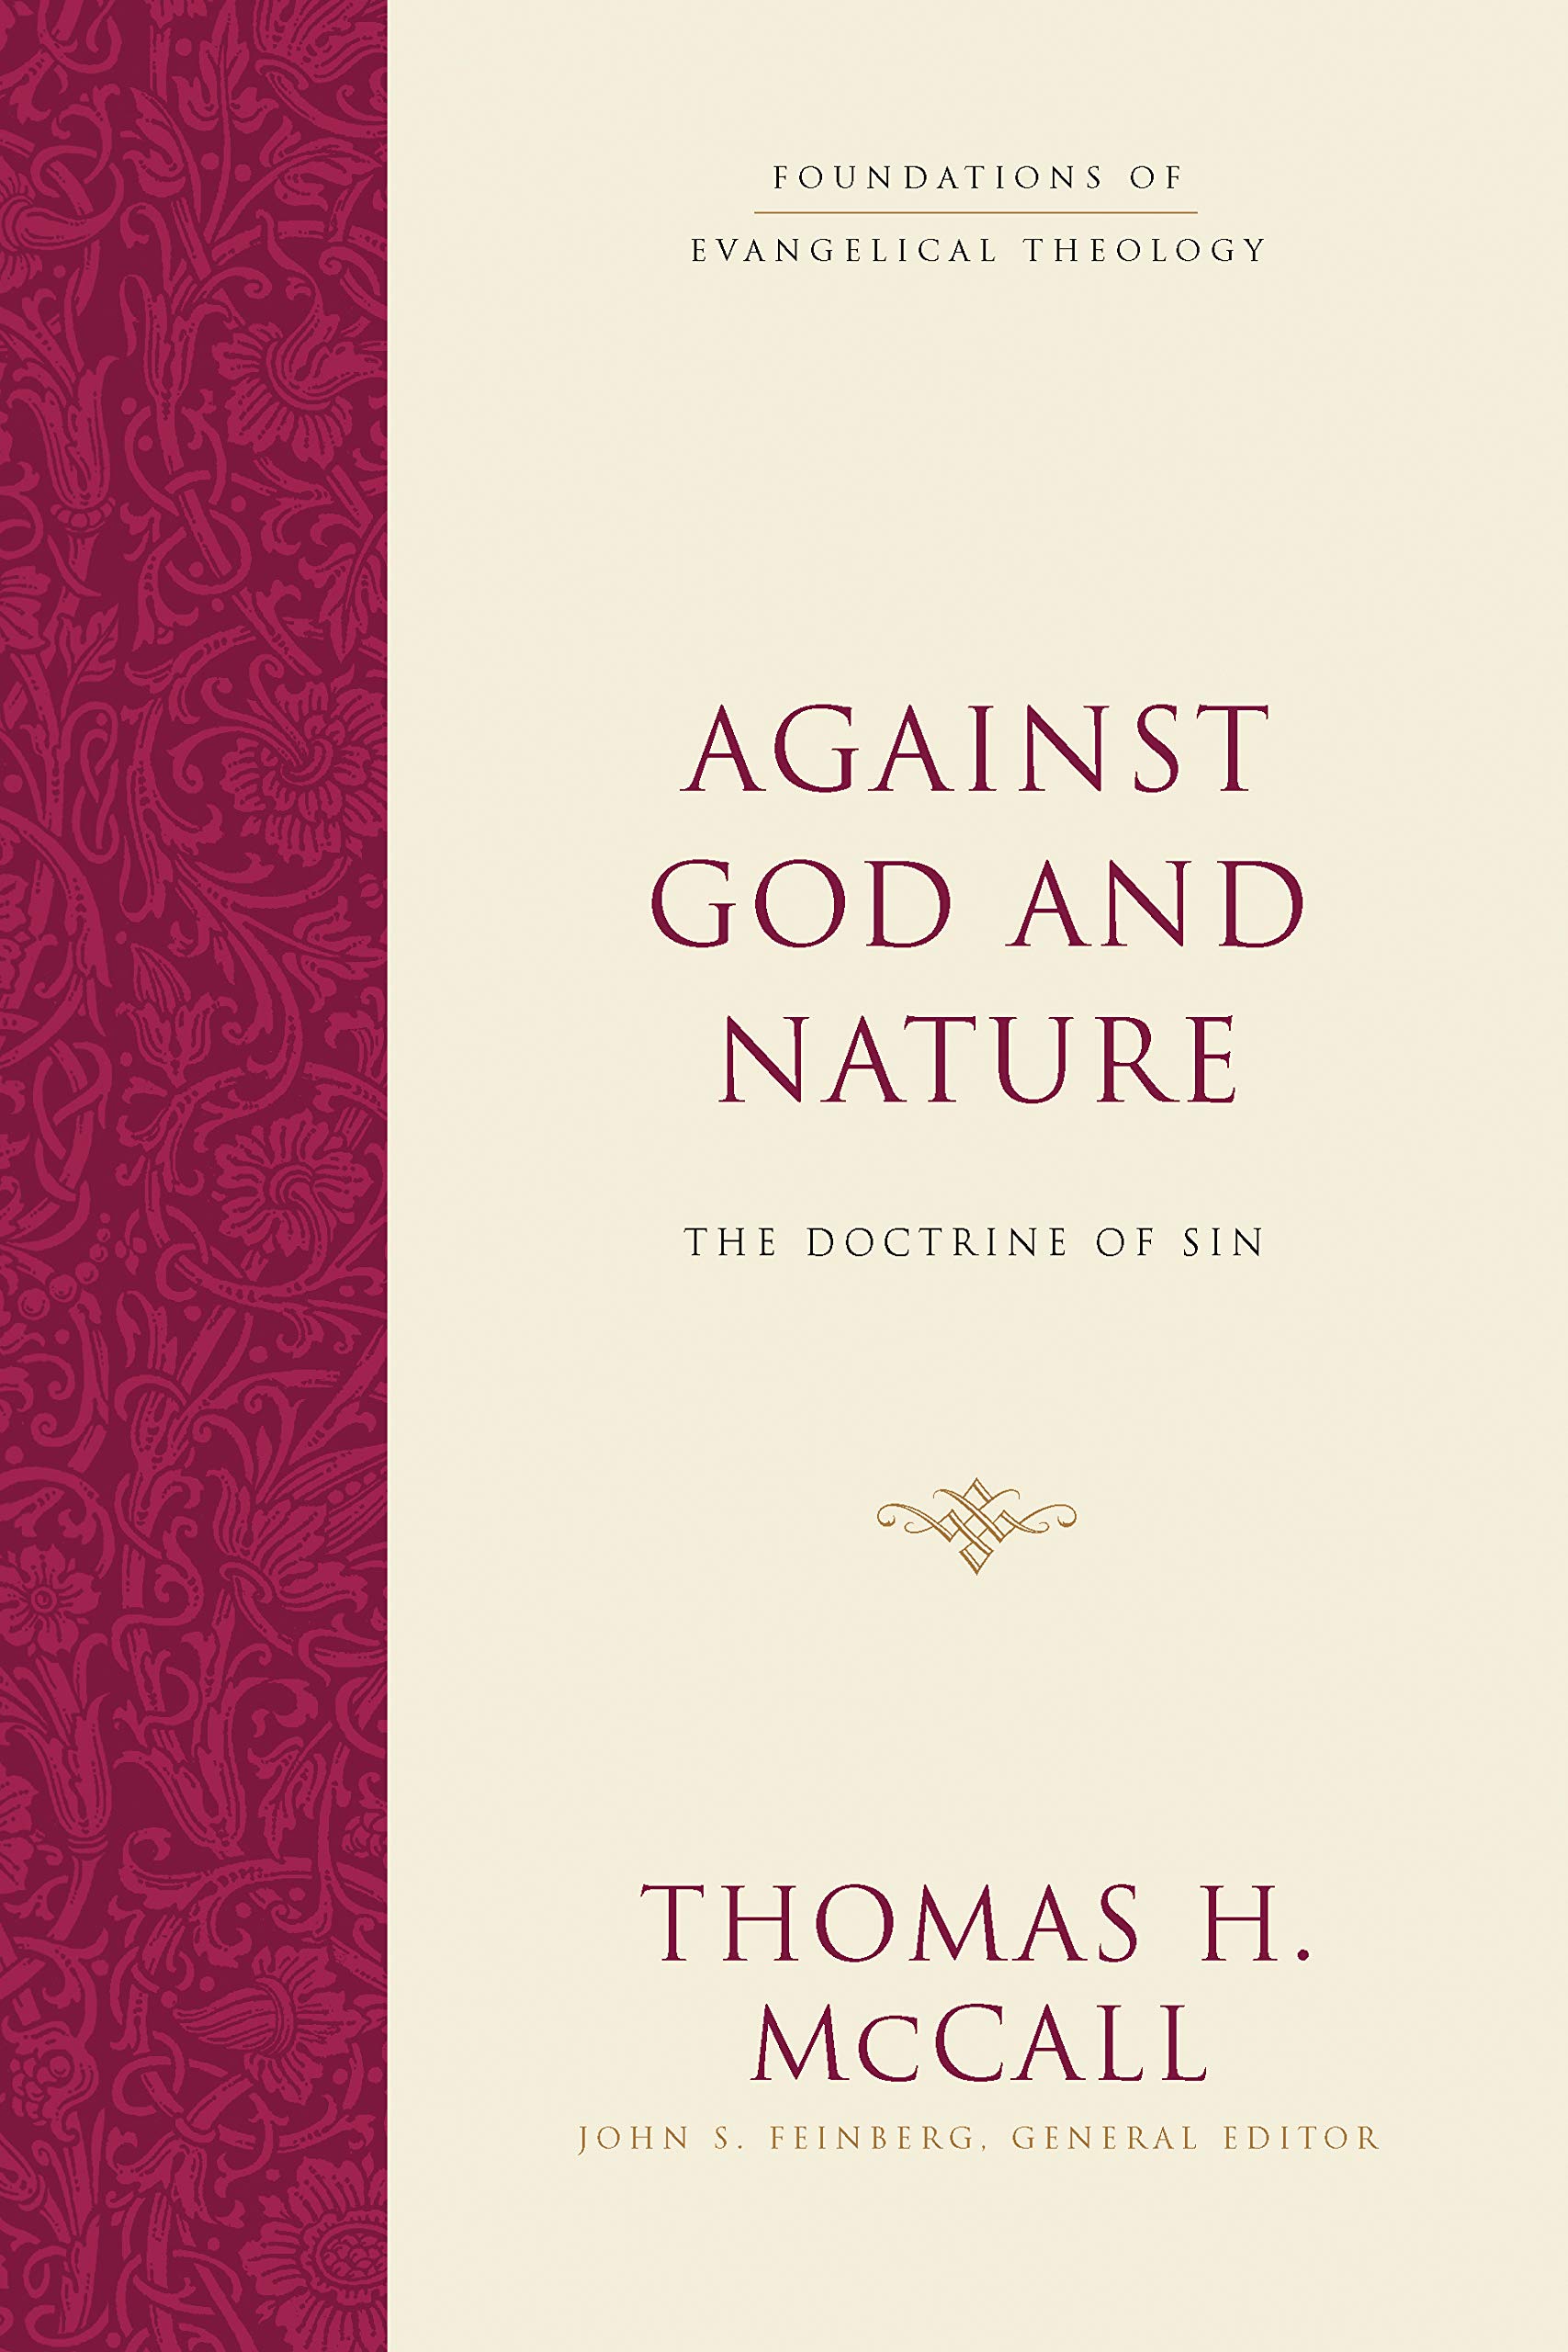 Book Notice: AGAINST GOD AND NATURE: THE DOCTRINE OF SIN (FOUNDATIONS OF EVANGELICAL THEOLOGY), by Thomas H. McCall